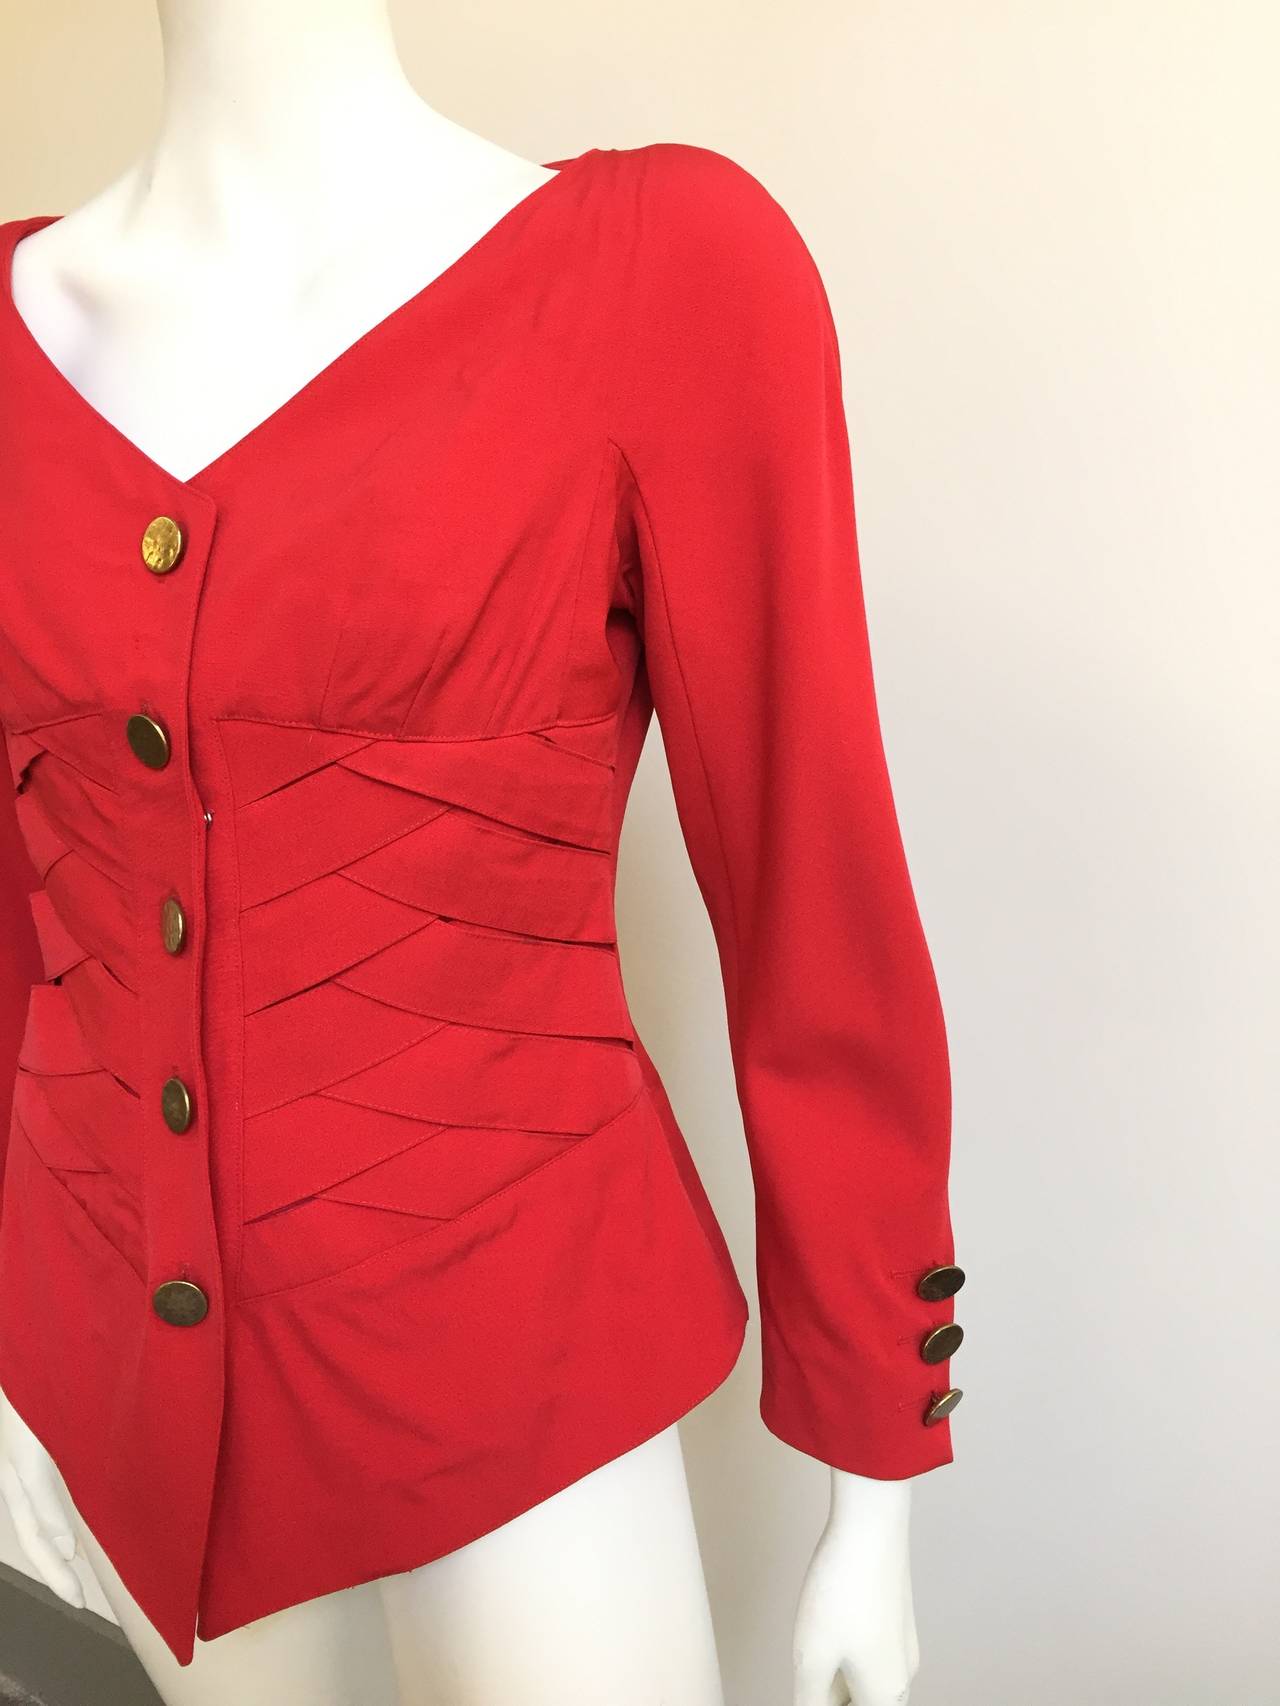 Jacques Molko 1980s Red Woven Wool Jacket Size 6. In Good Condition For Sale In Atlanta, GA